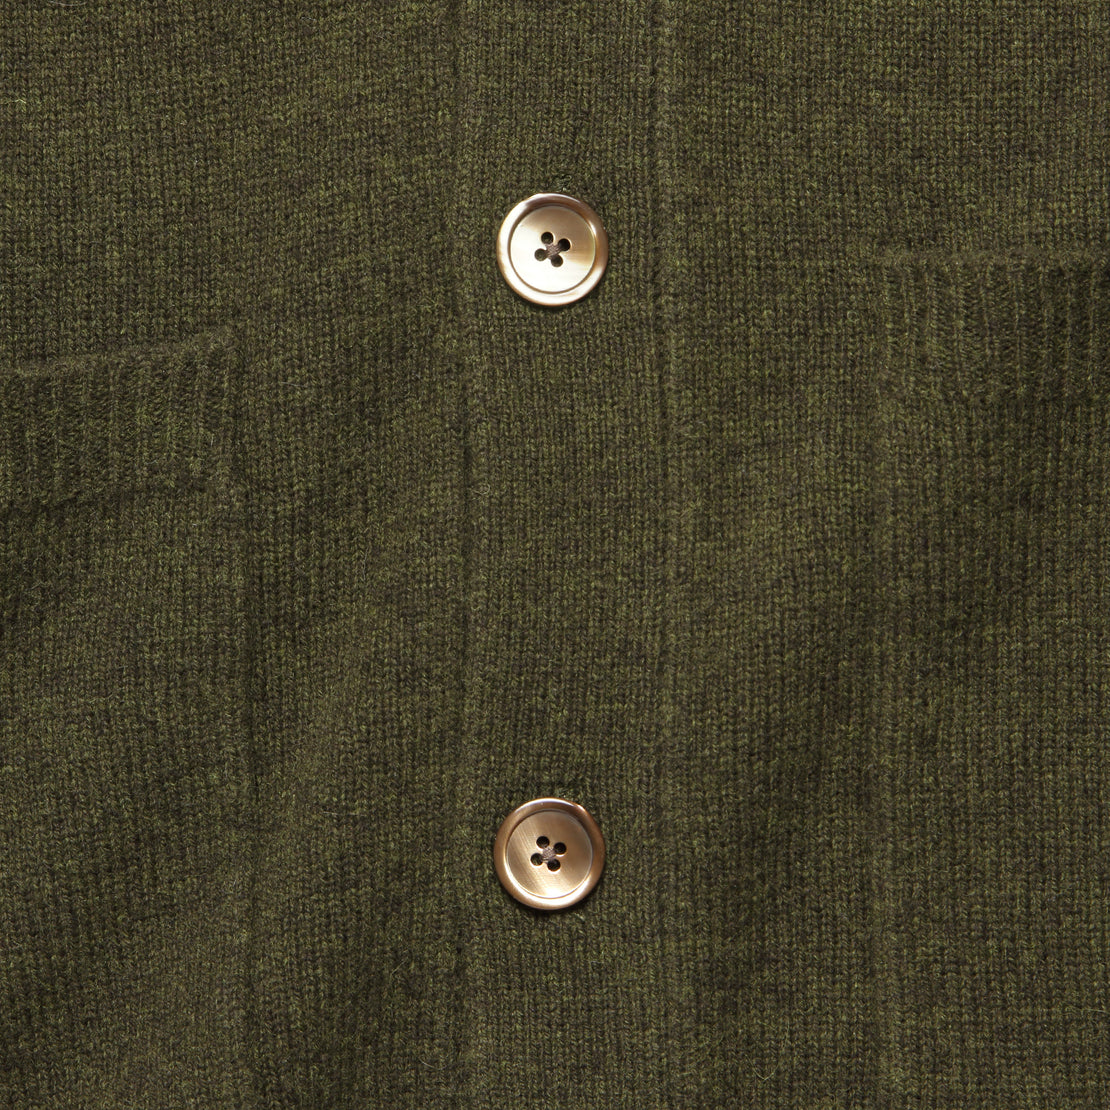 Wool Work Jacket  - Heather Green - Alex Mill - STAG Provisions - Outerwear - Coat / Jacket